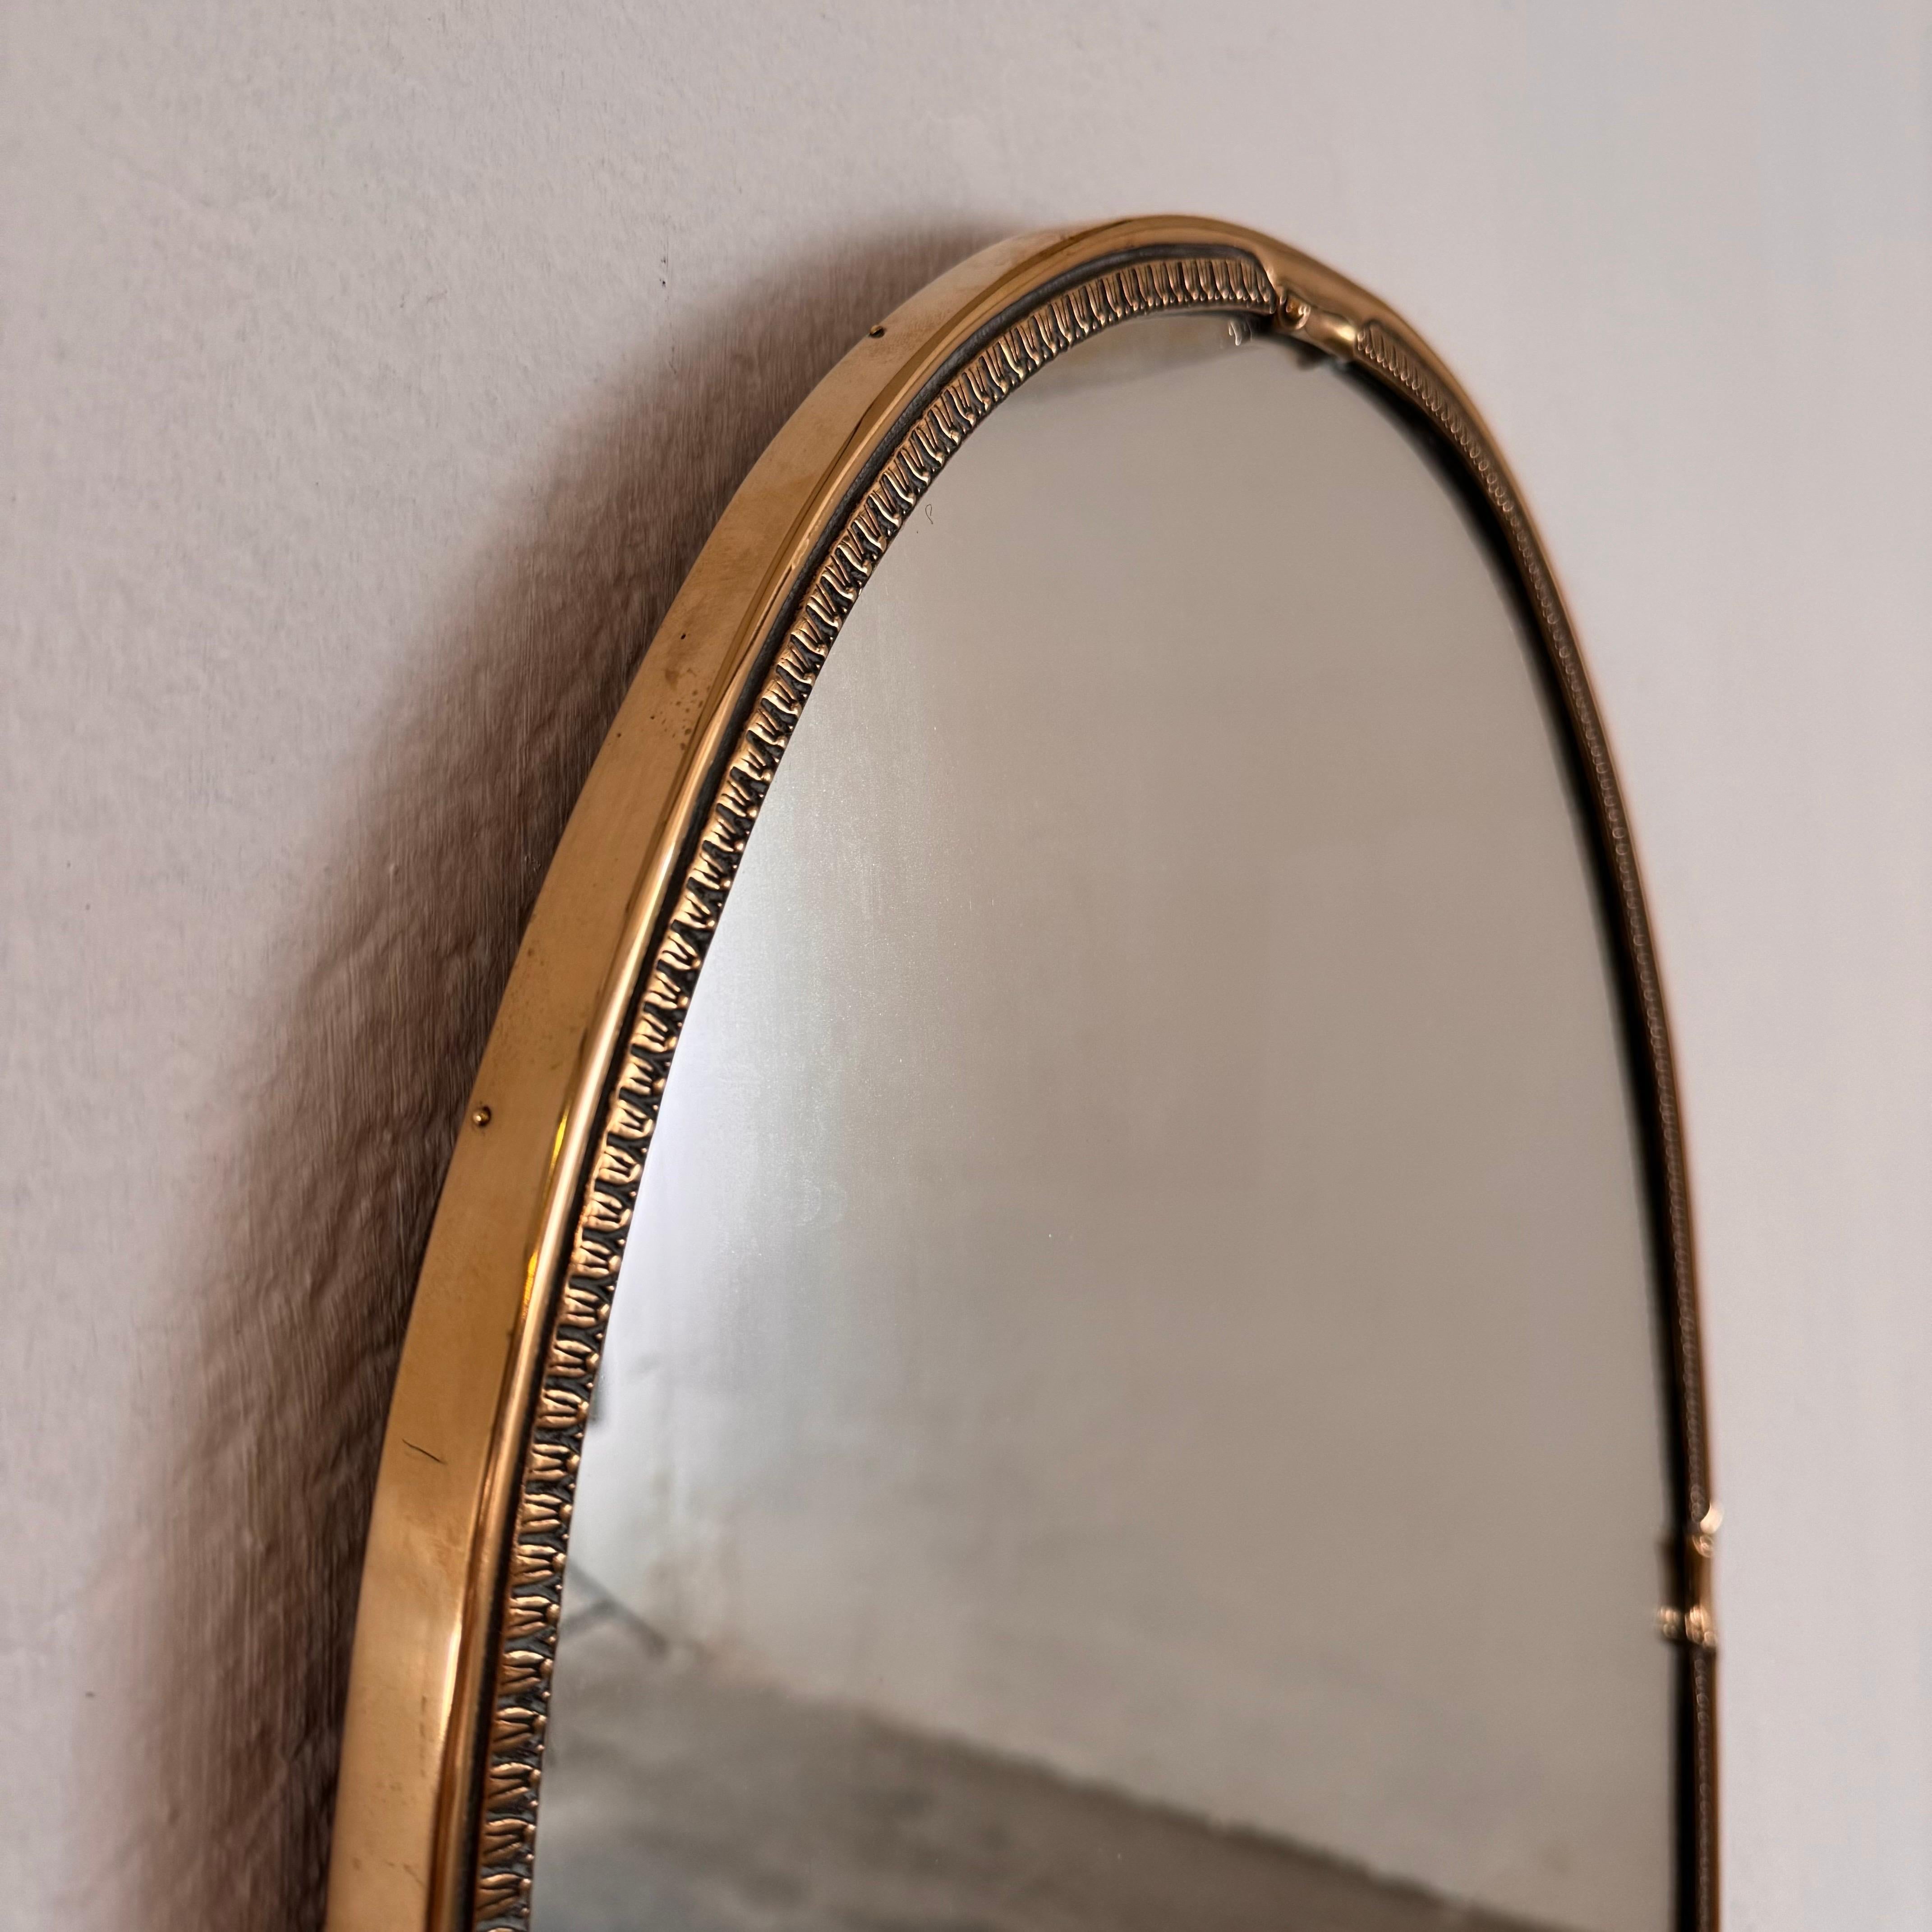 Exquisite 1950s Italian Brass Mirror in the Style of Gio Ponti For Sale 5